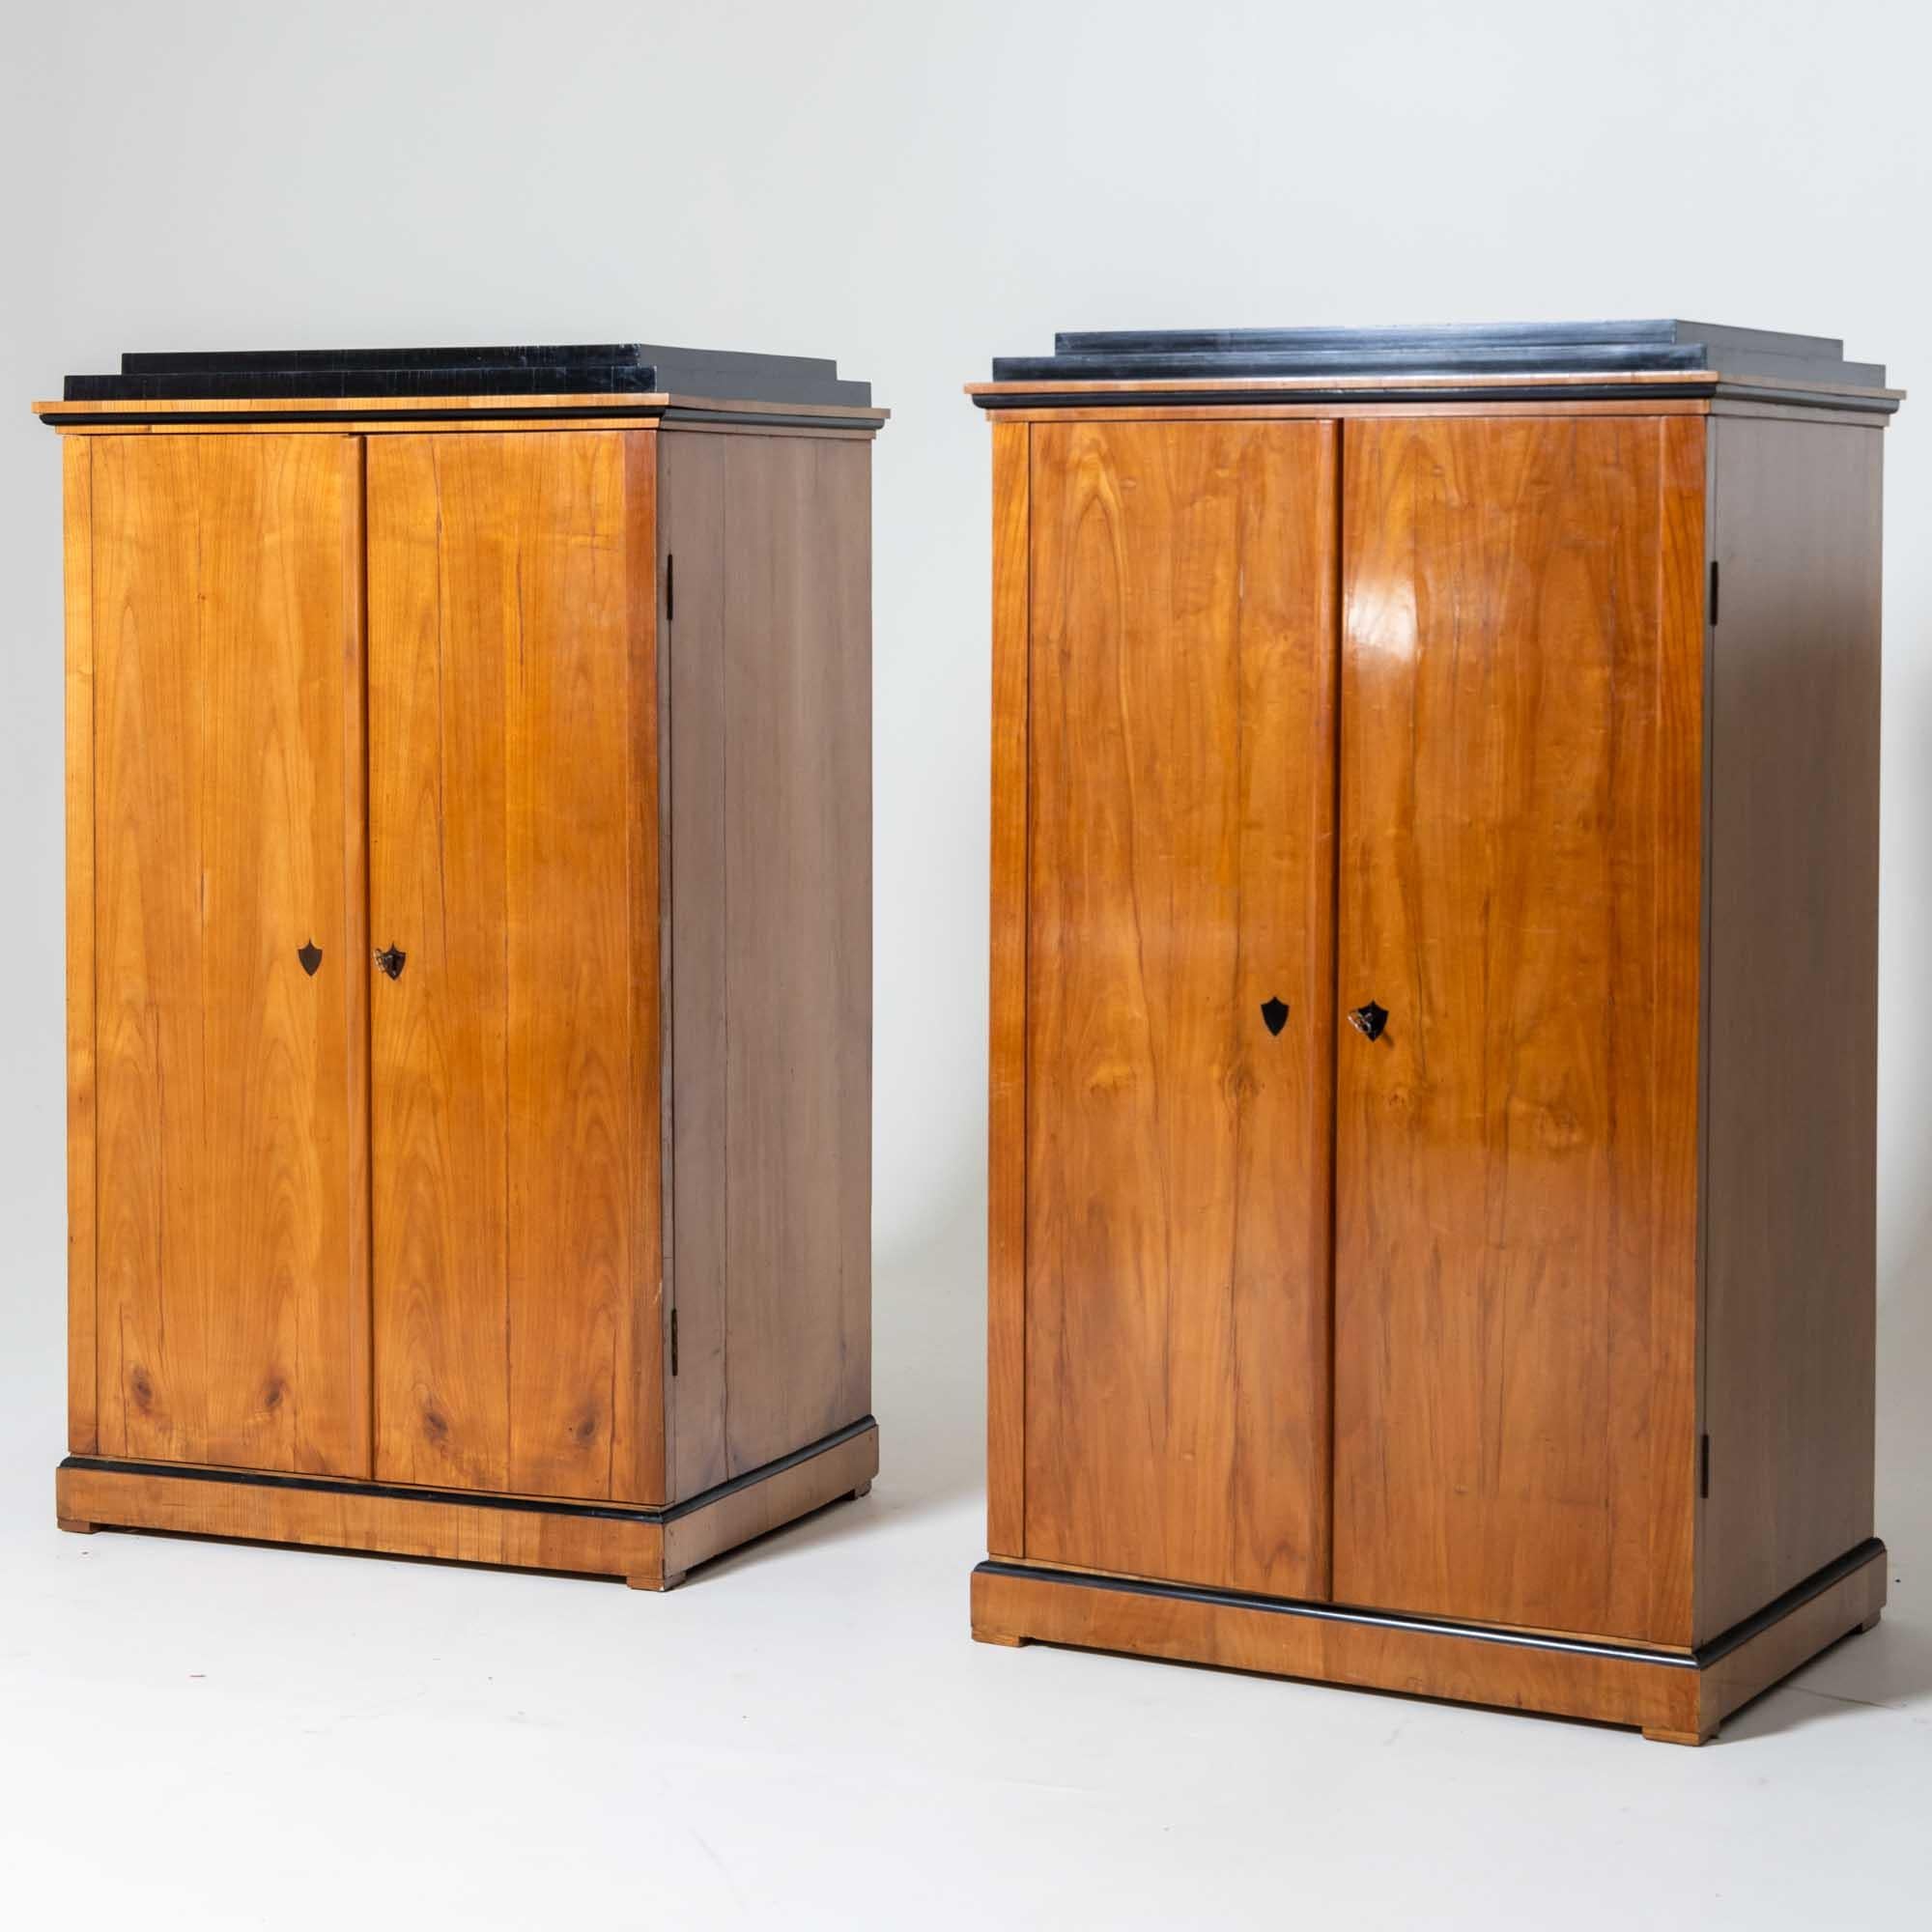 Early 19th Century Pair of Biedermeier Collection Cabinets, Germany, probably Munich, c. 1820